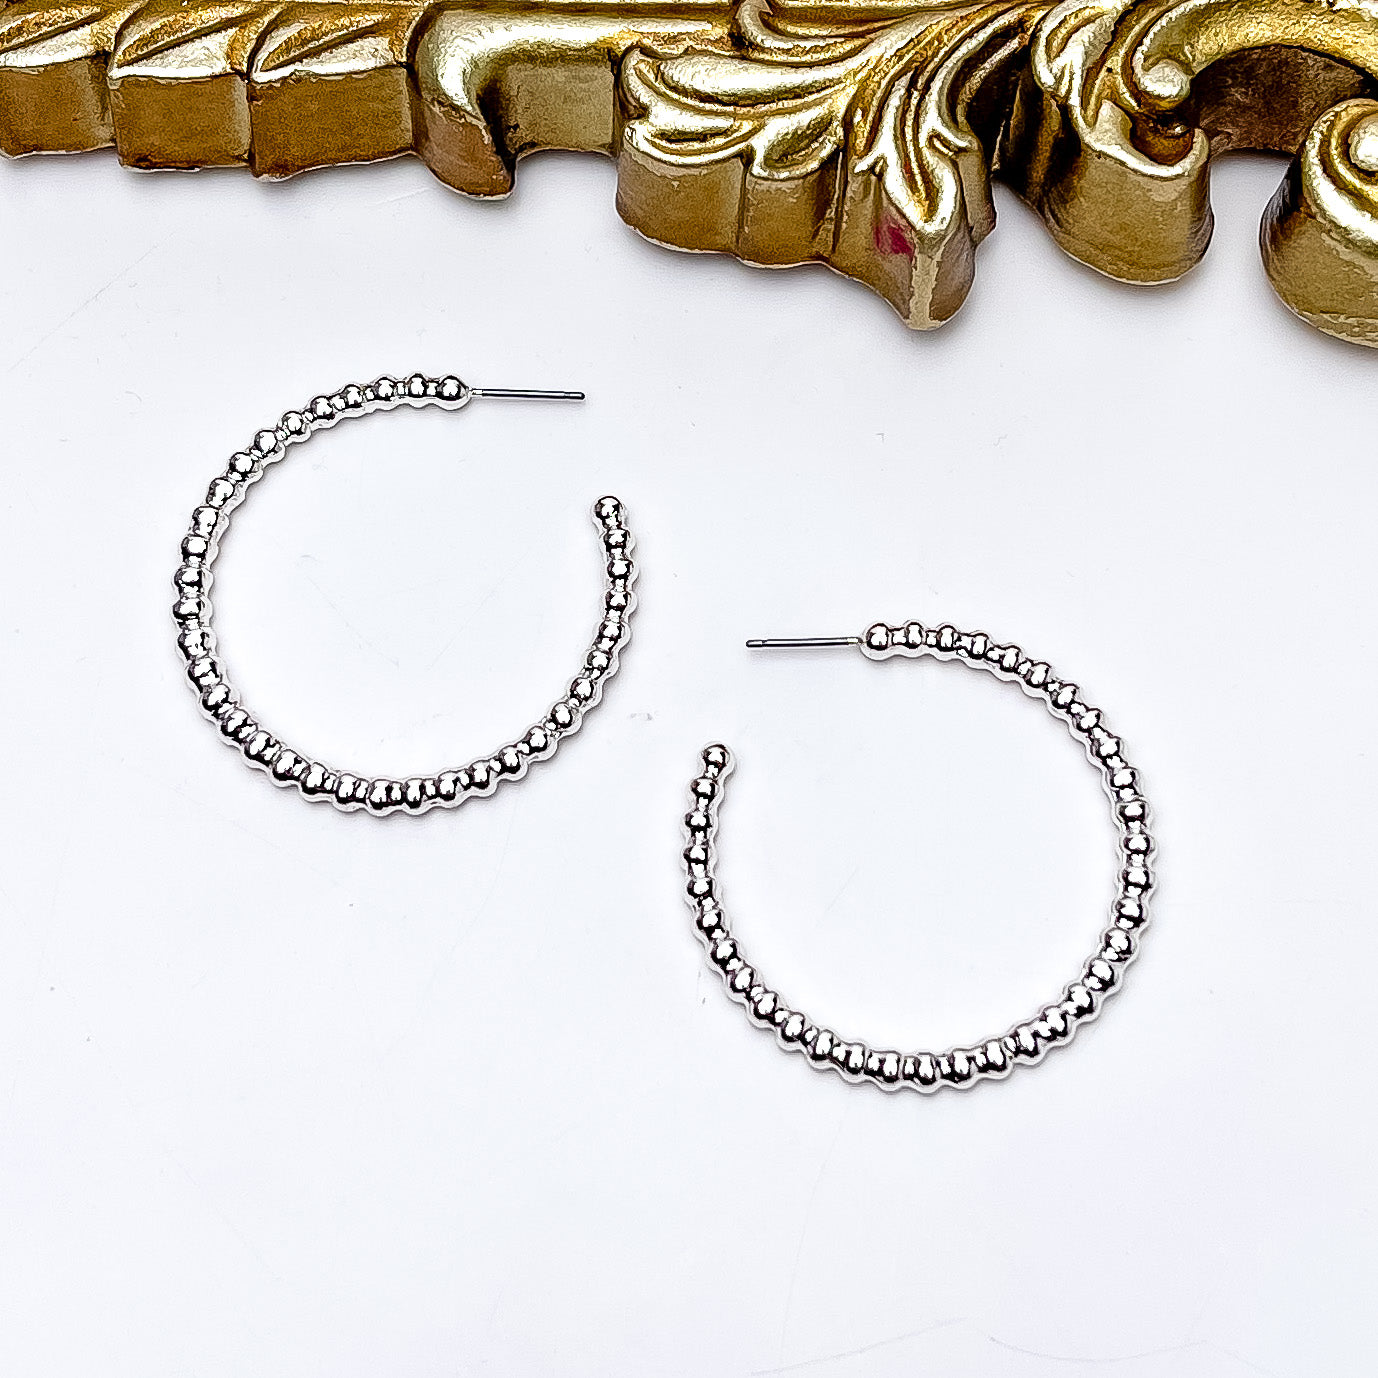 Silver Tone Connecting Beads Hoop Earrings. Pictured on a white background with a gold frame above the earrings.